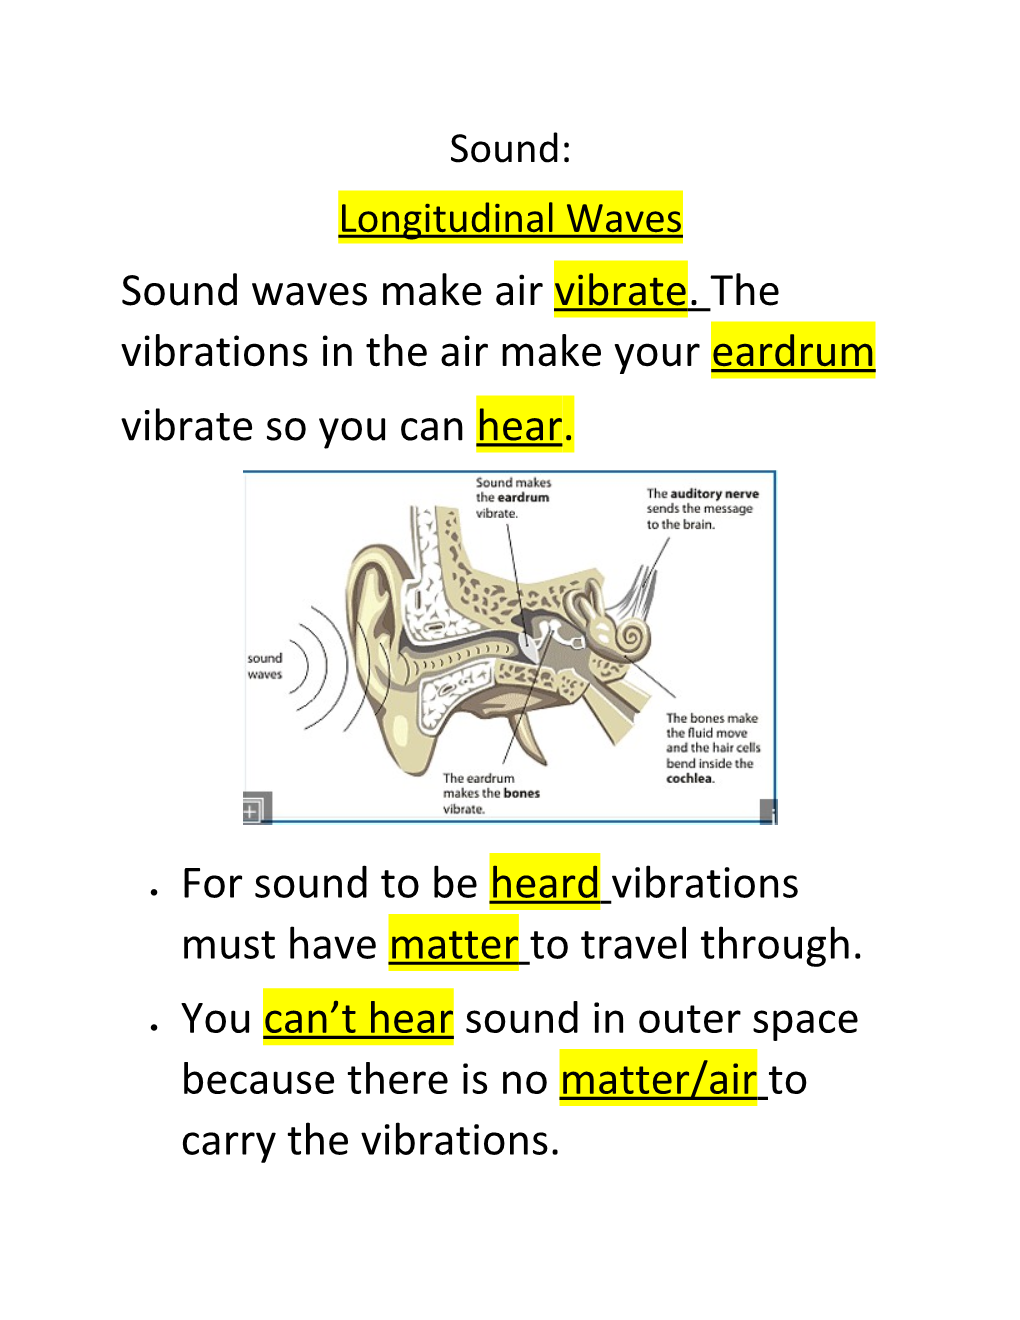 Sound Waves Make Air Vibrate. the Vibrations in the Air Make Your Eardrum